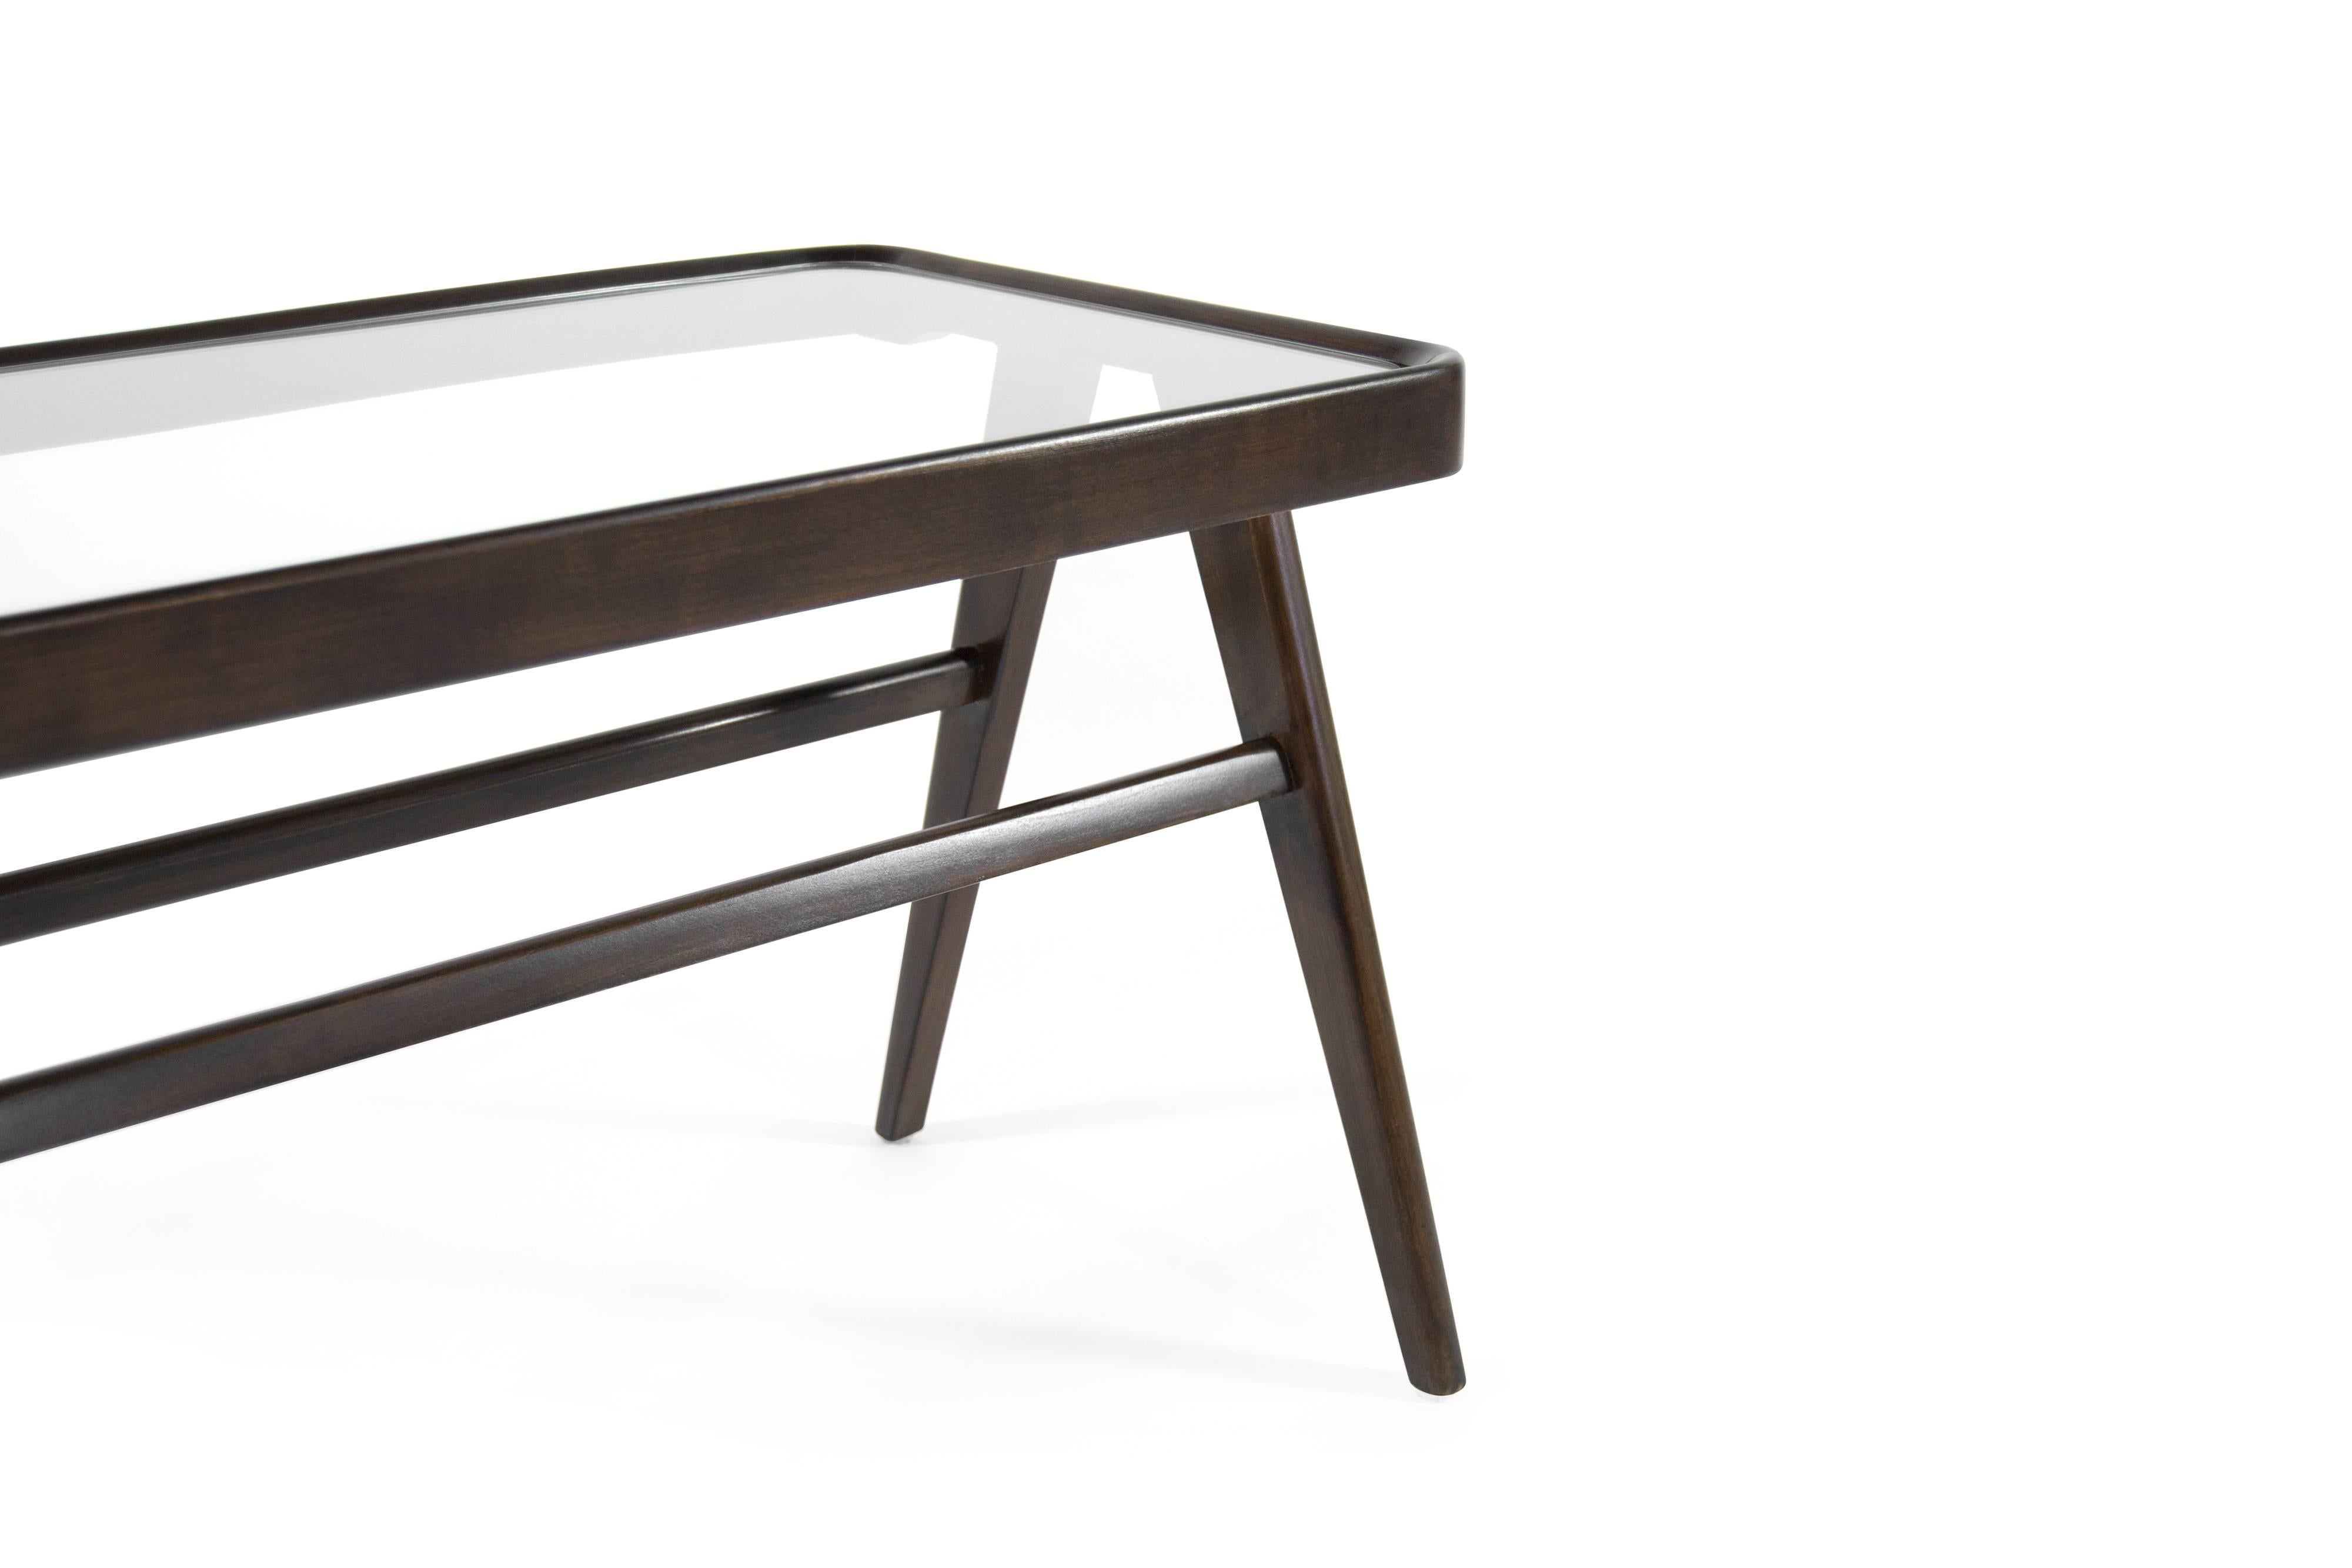 20th Century Modernist Cherrywood Coffee Table, Italy, 1950s